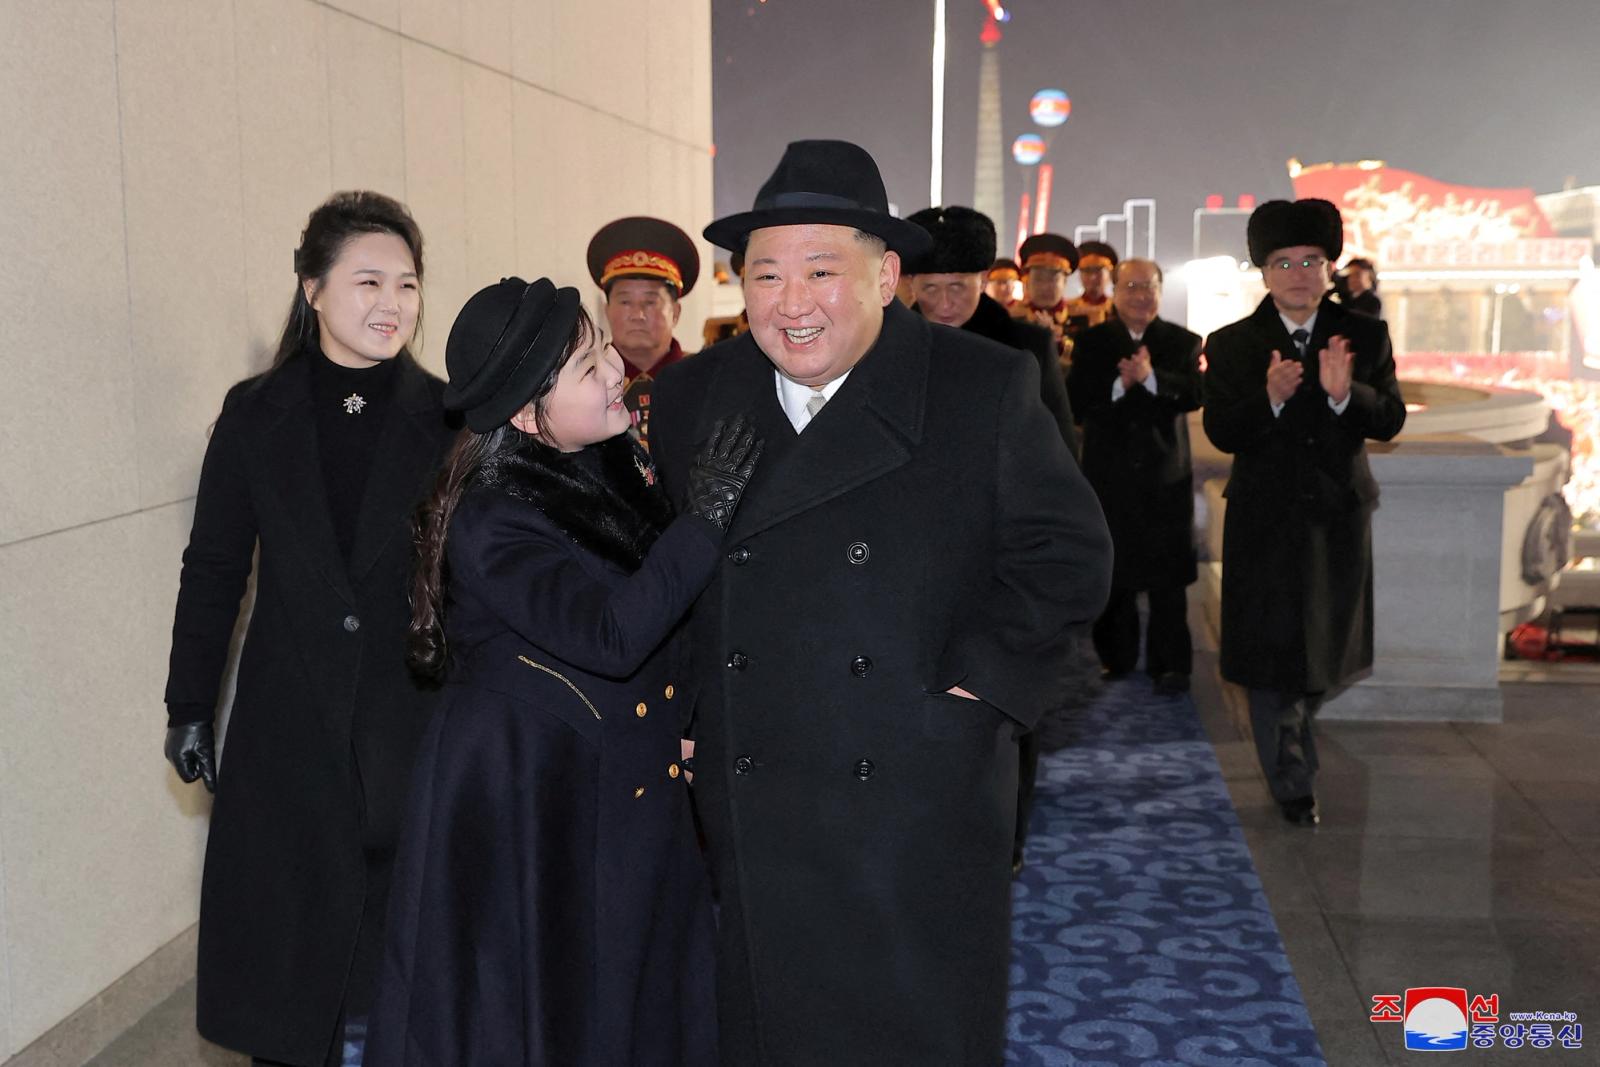 North Korean leader Kim Jong Un, his wife Ri Sol Ju and their daughter Kim Ju Ae attend a military parade to mark the 75th founding anniversary of North Korea's army, at Kim Il Sung Square in Pyongyang, North Korea February 8, 2023,